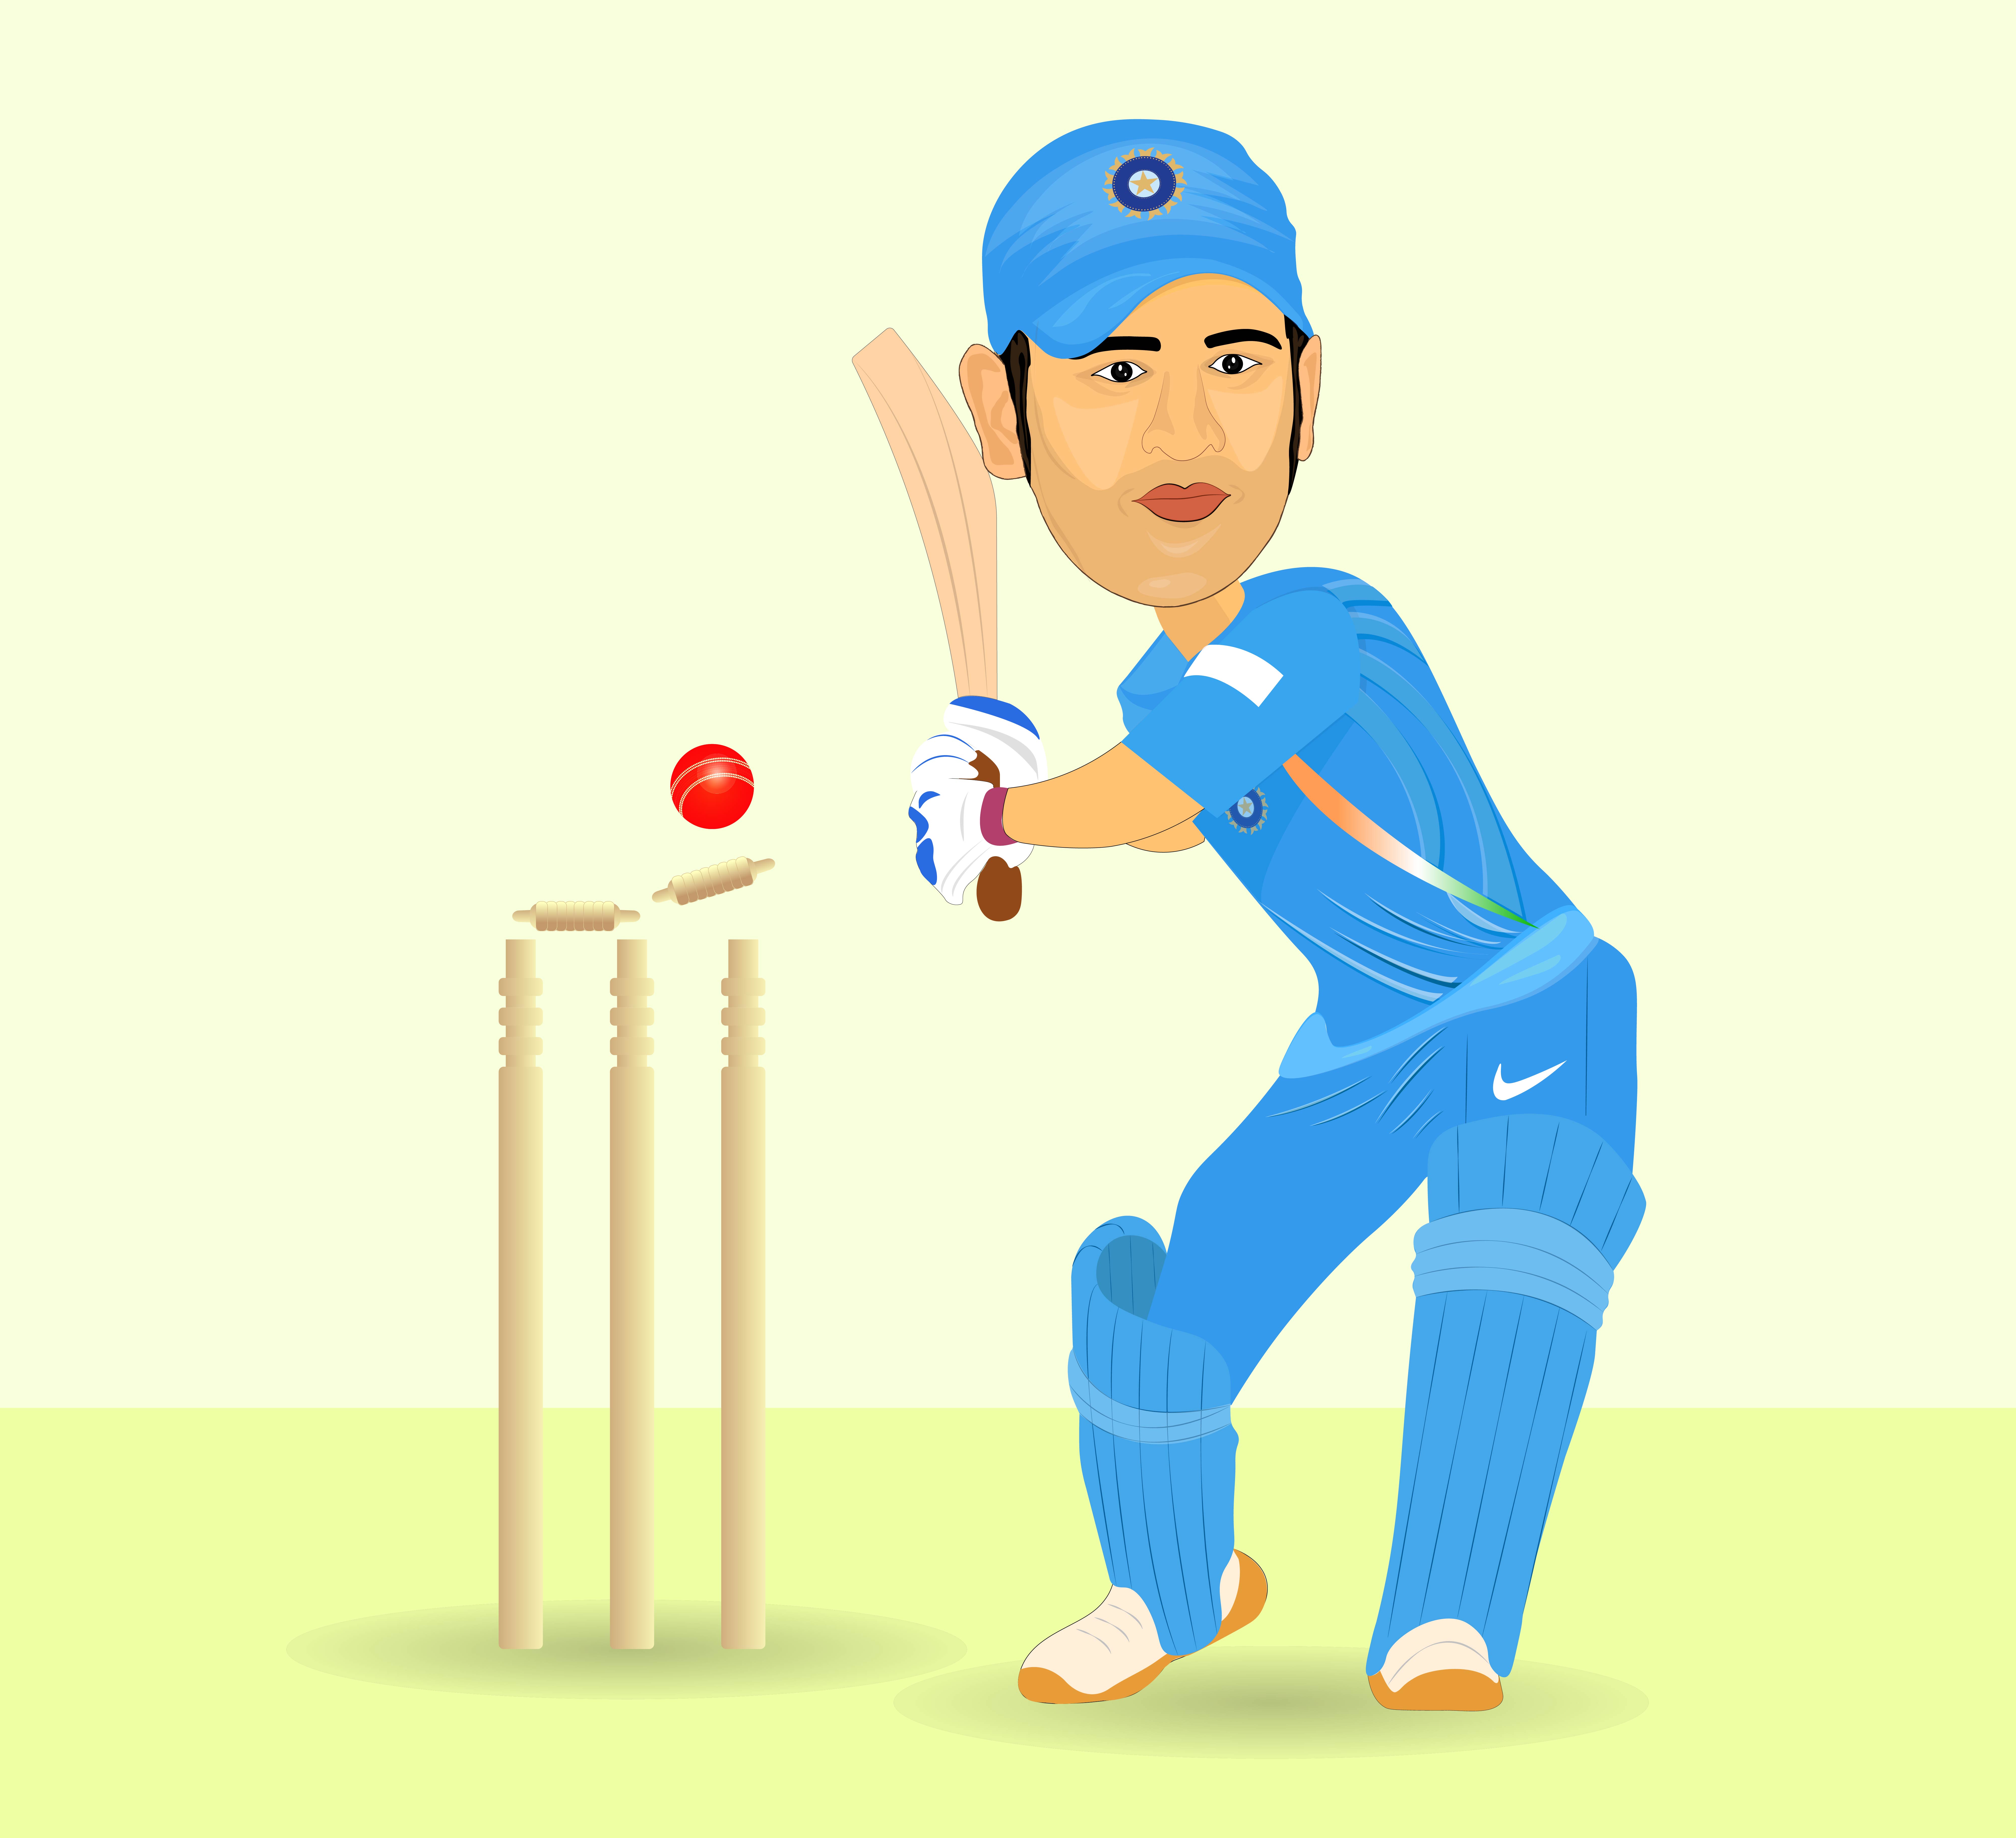 MS Dhoni , former international cricketer vector illustration, Wickets,bat, ball, india cricket player.